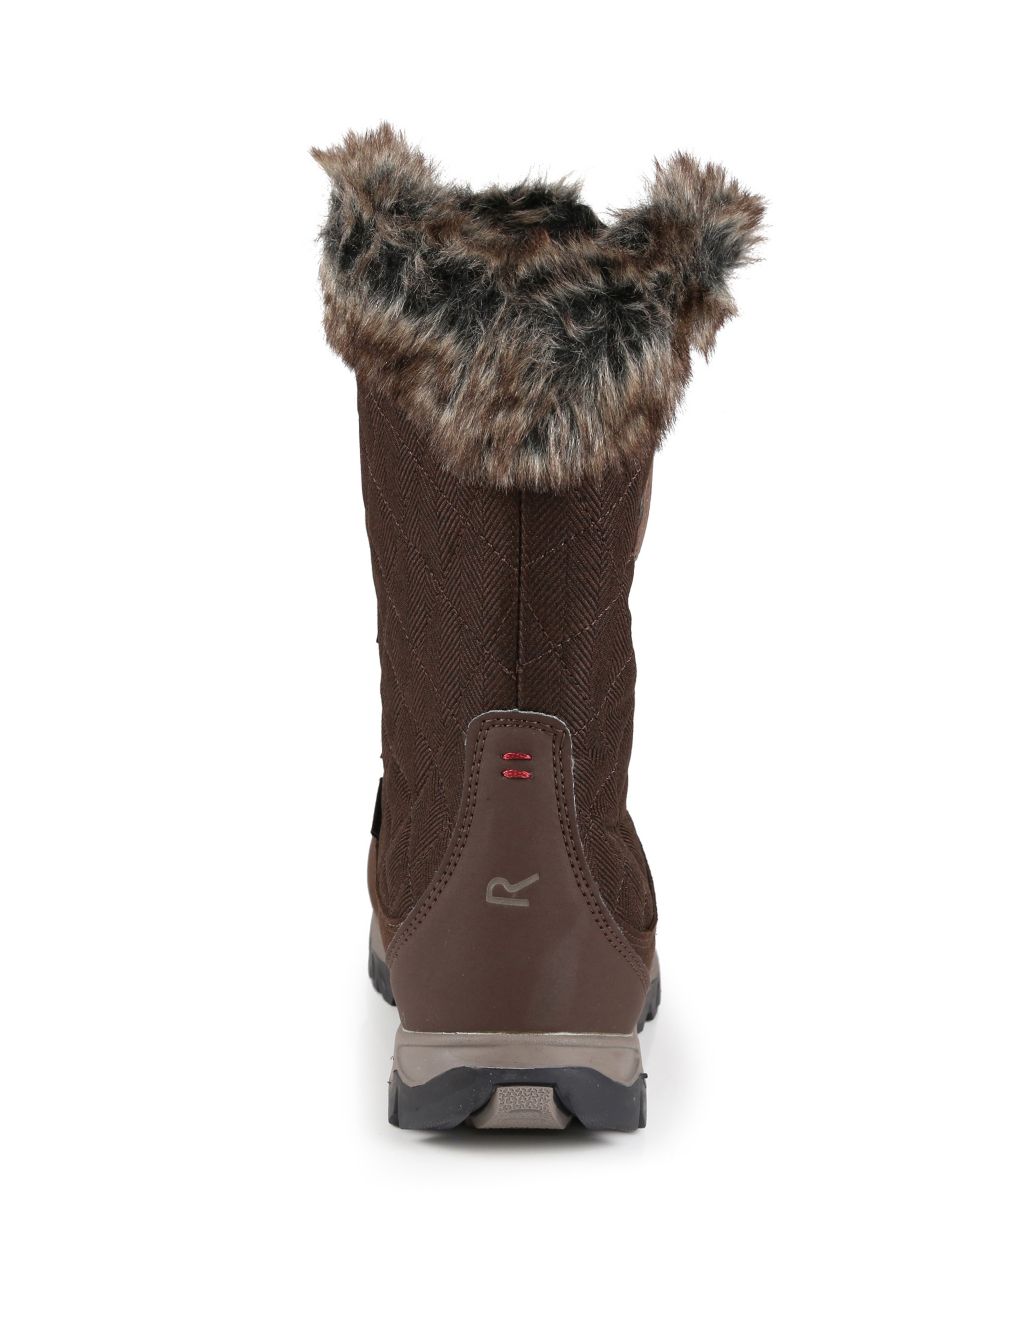 Lady Newley Thermo Winter Boots image 4